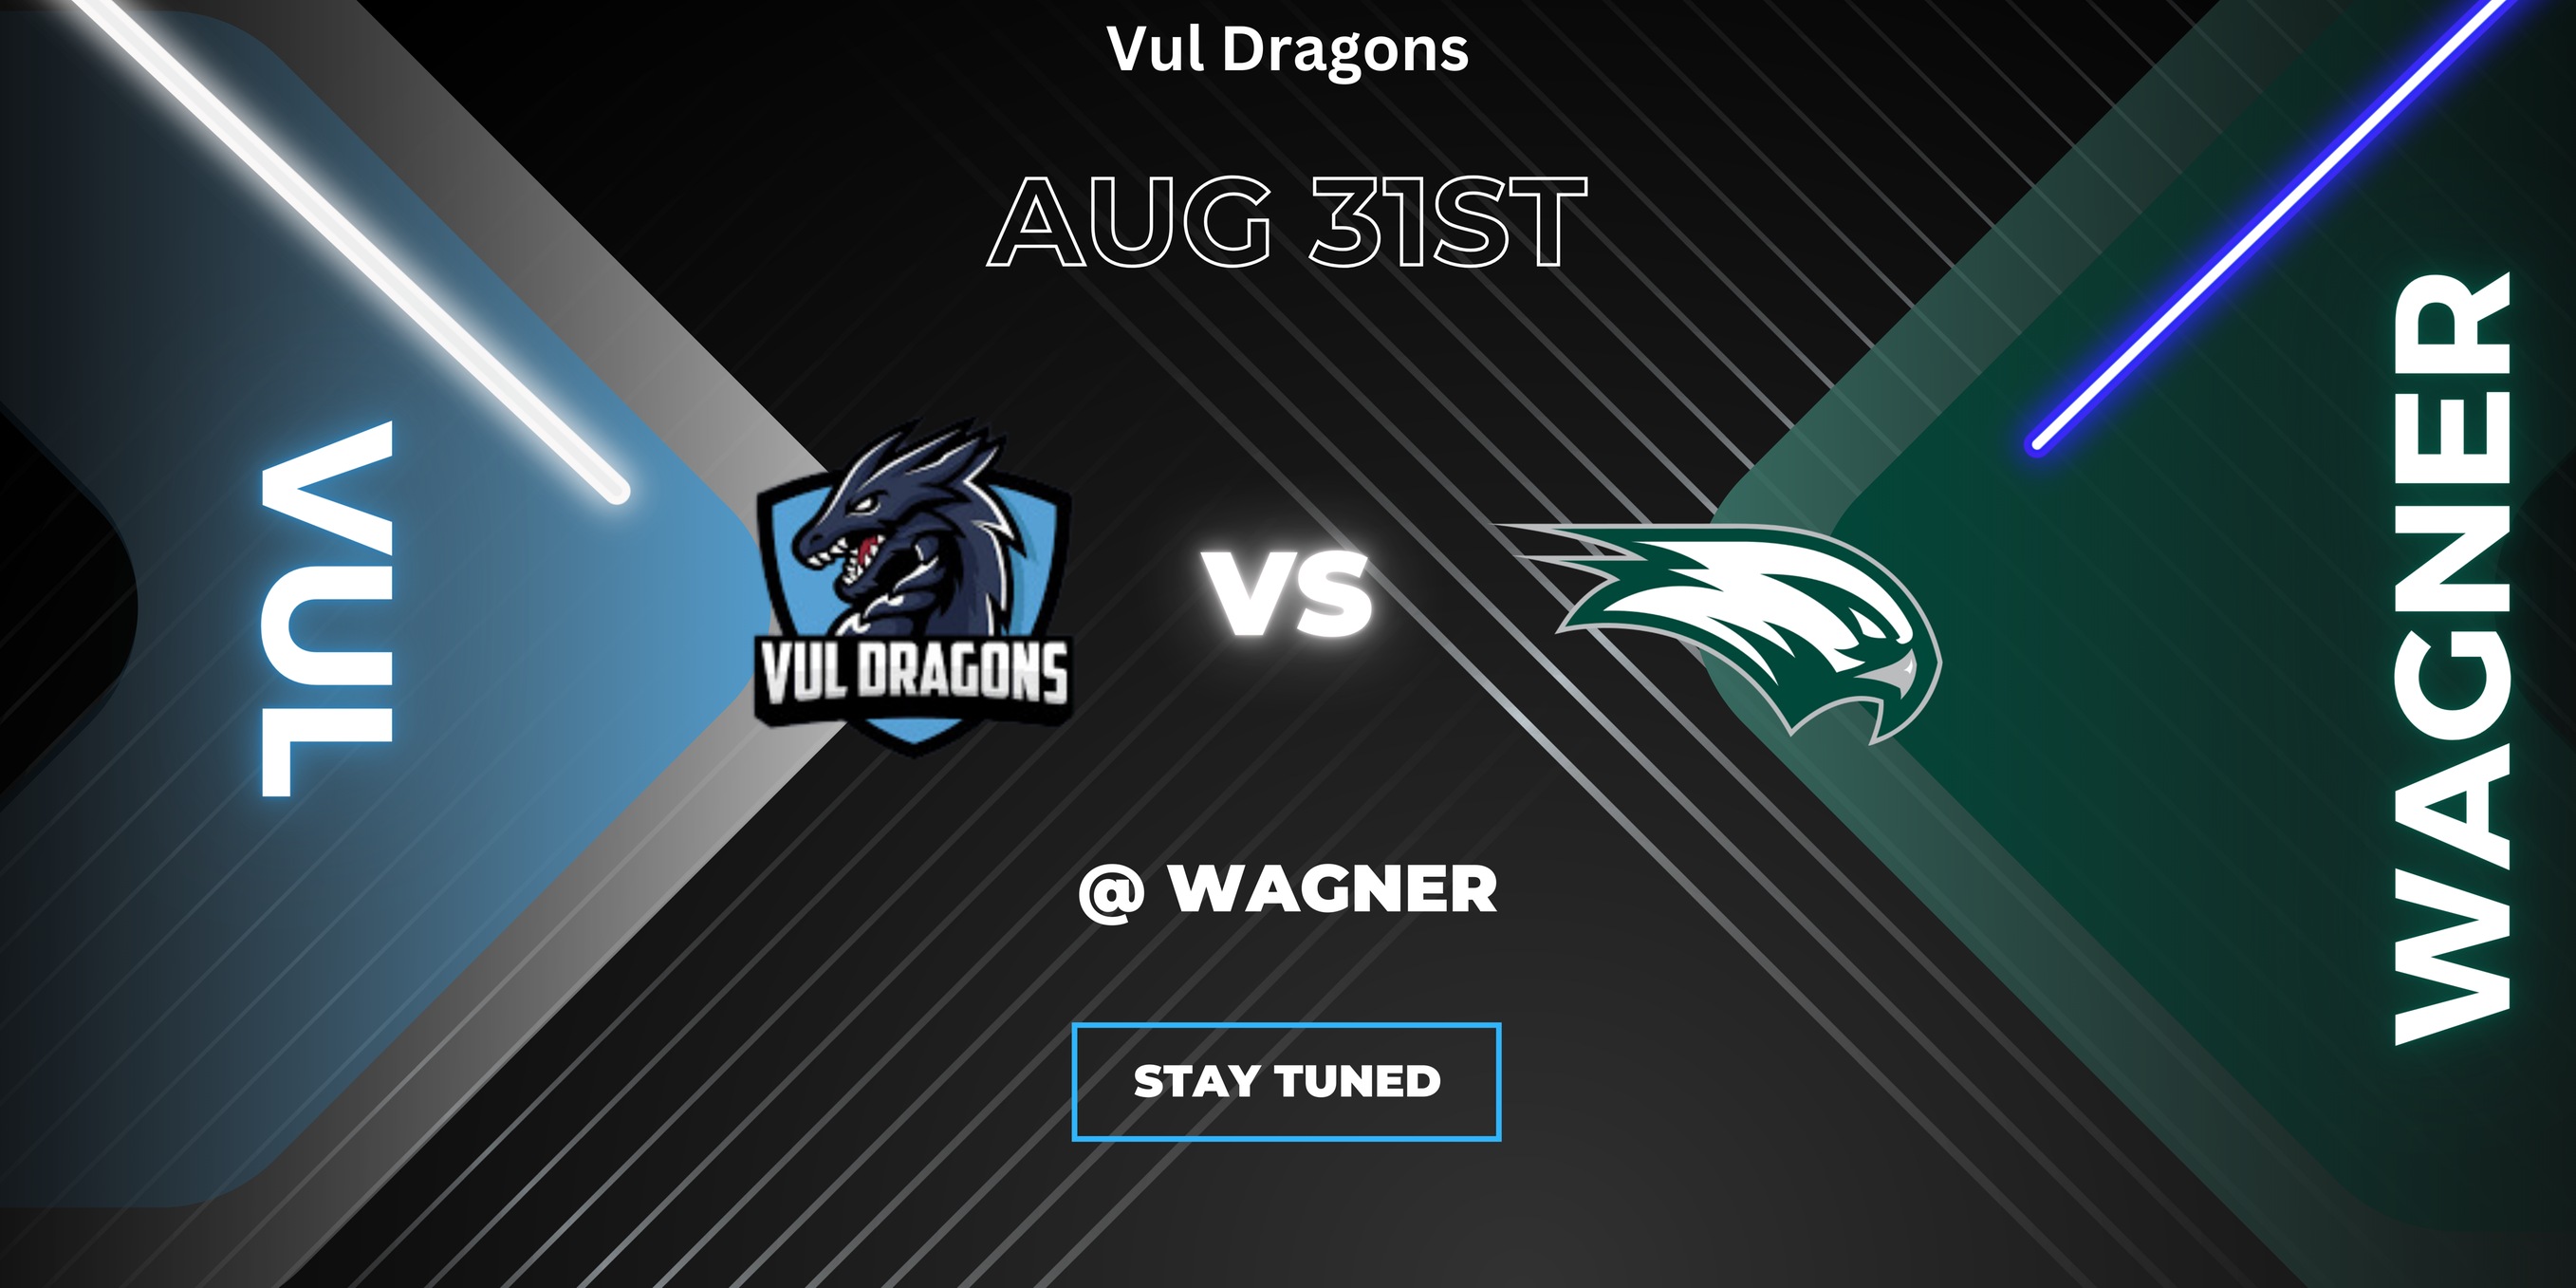 Vul Dragons kick off their football season on August 31st away at Wagner !